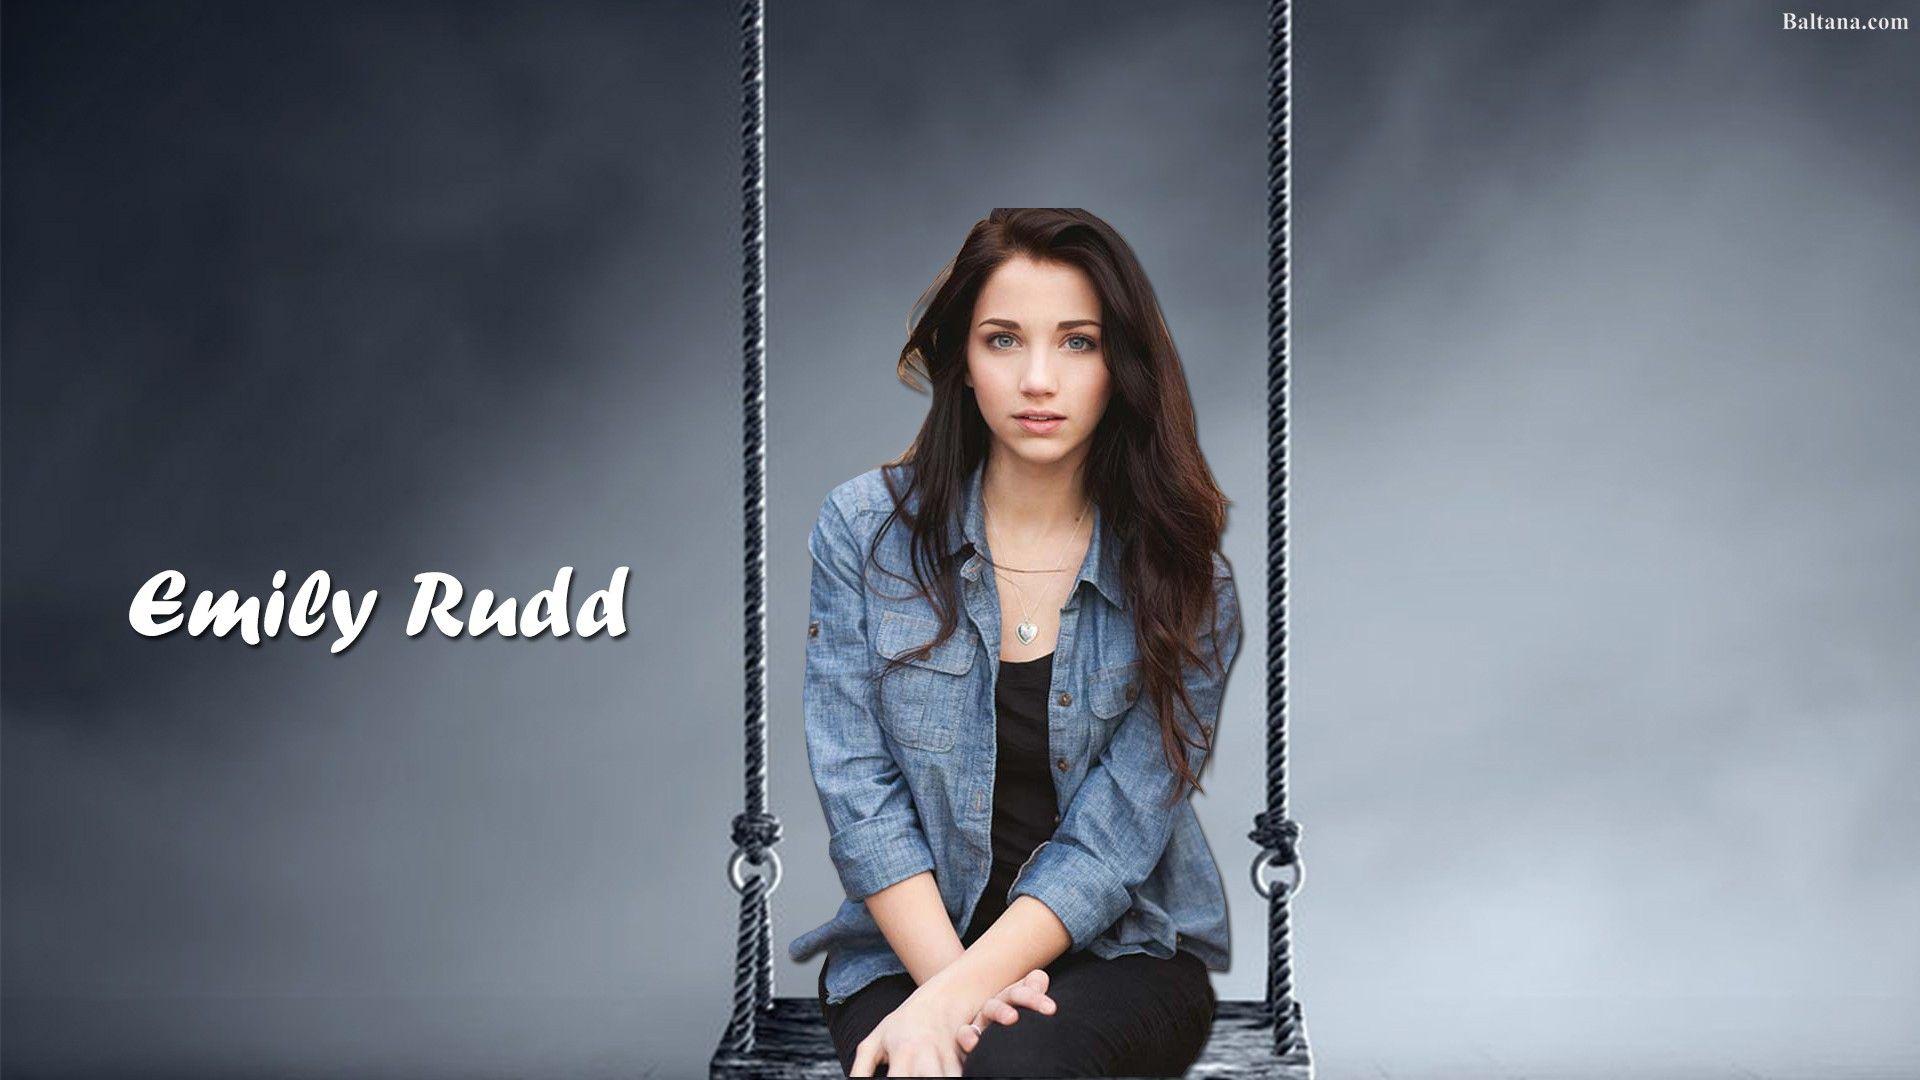 Emily Rudd wallpapers, Women, HQ Emily Rudd pictures | 4K Wallpapers 2019